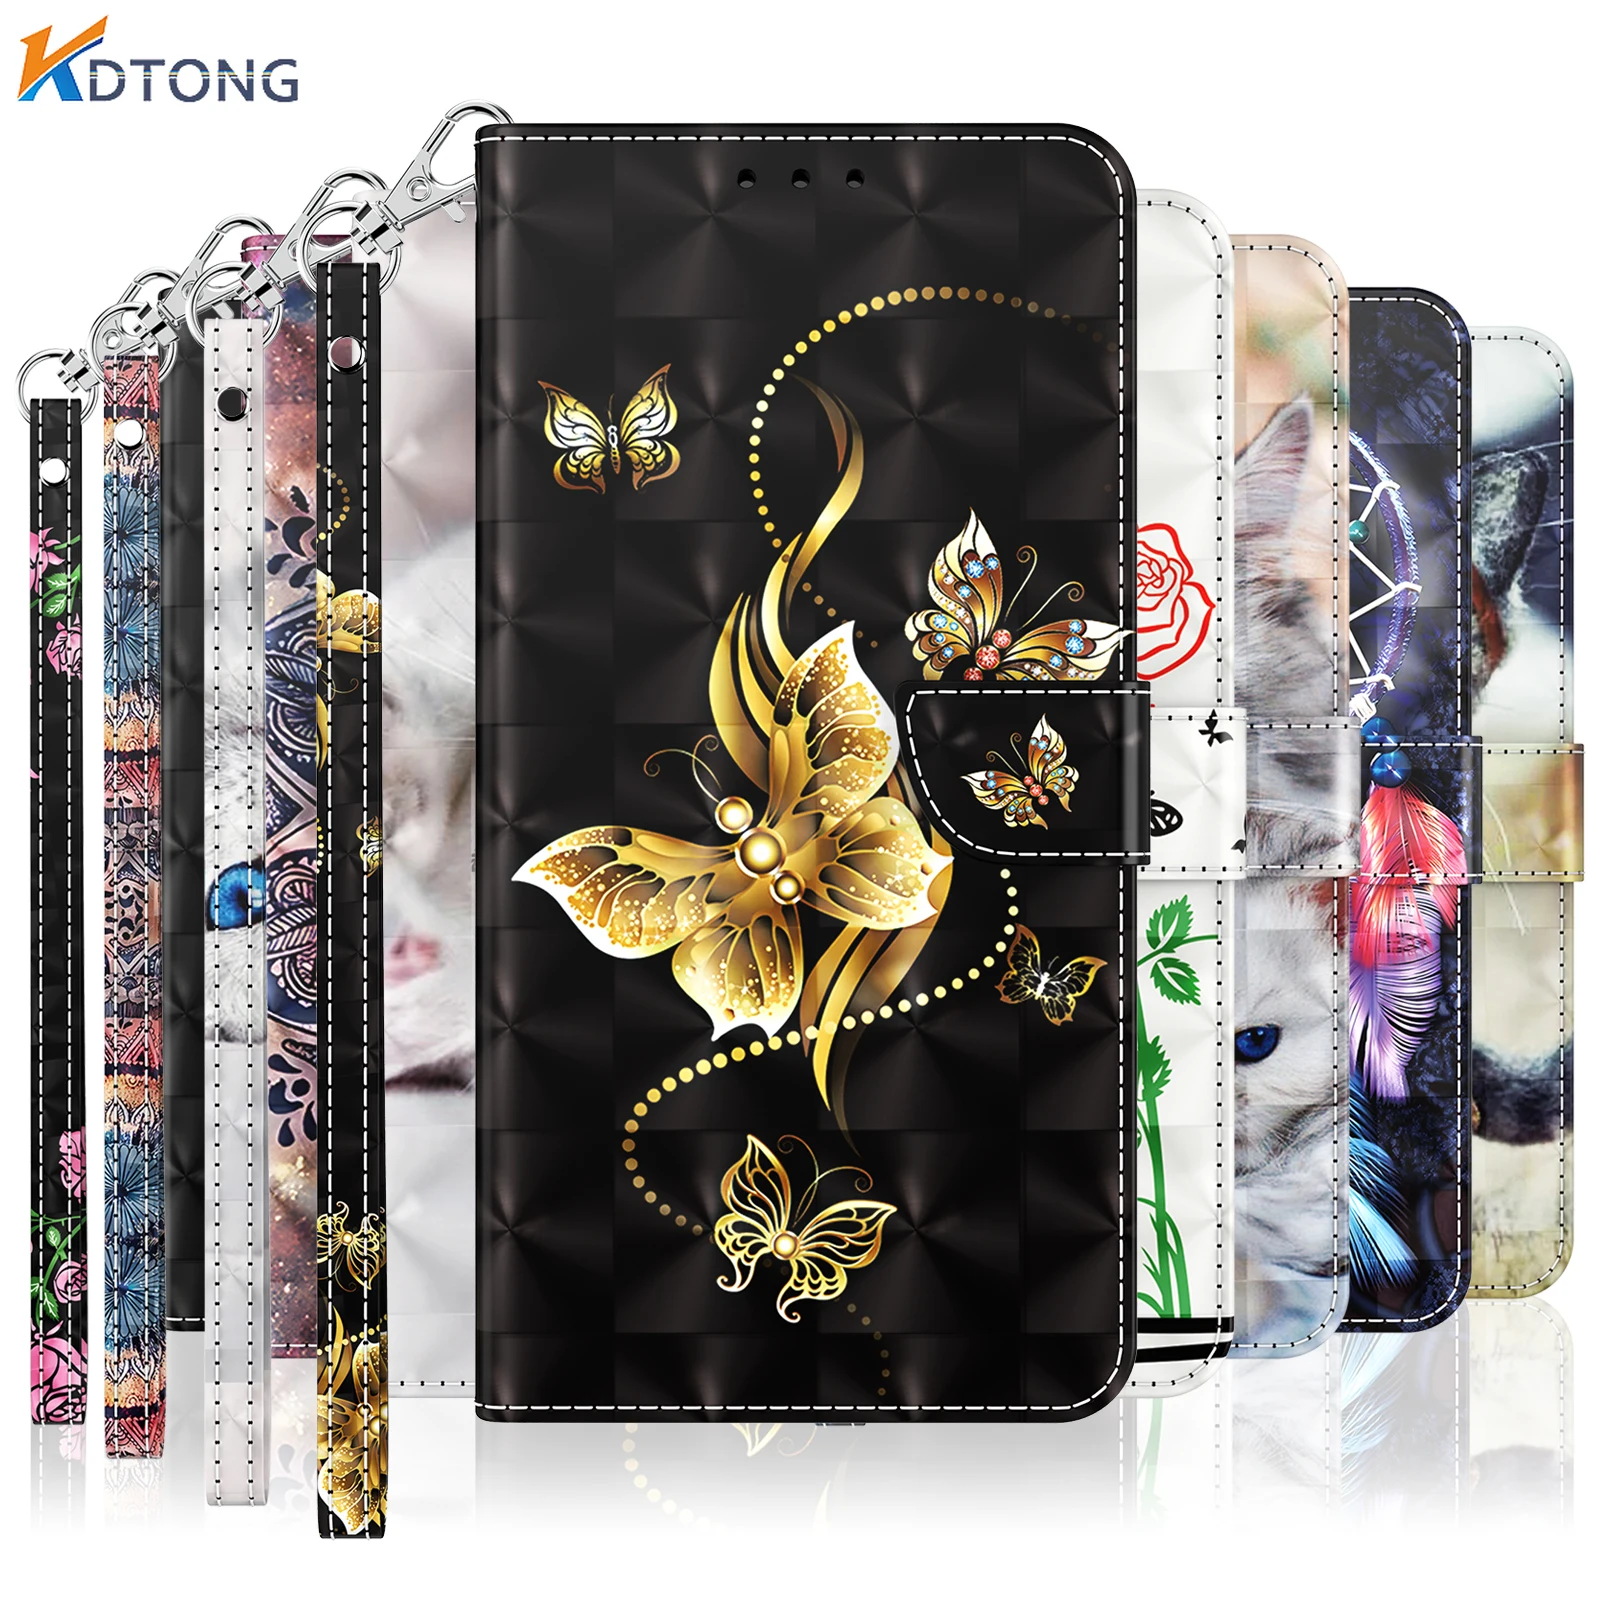 

Luxury Painted Leather Flip Phone Bags for Huawei P Smart P30 Lite Nova 4E Y6 Honor 20i 10i Play 8A Case Wallet Shockproof Cover